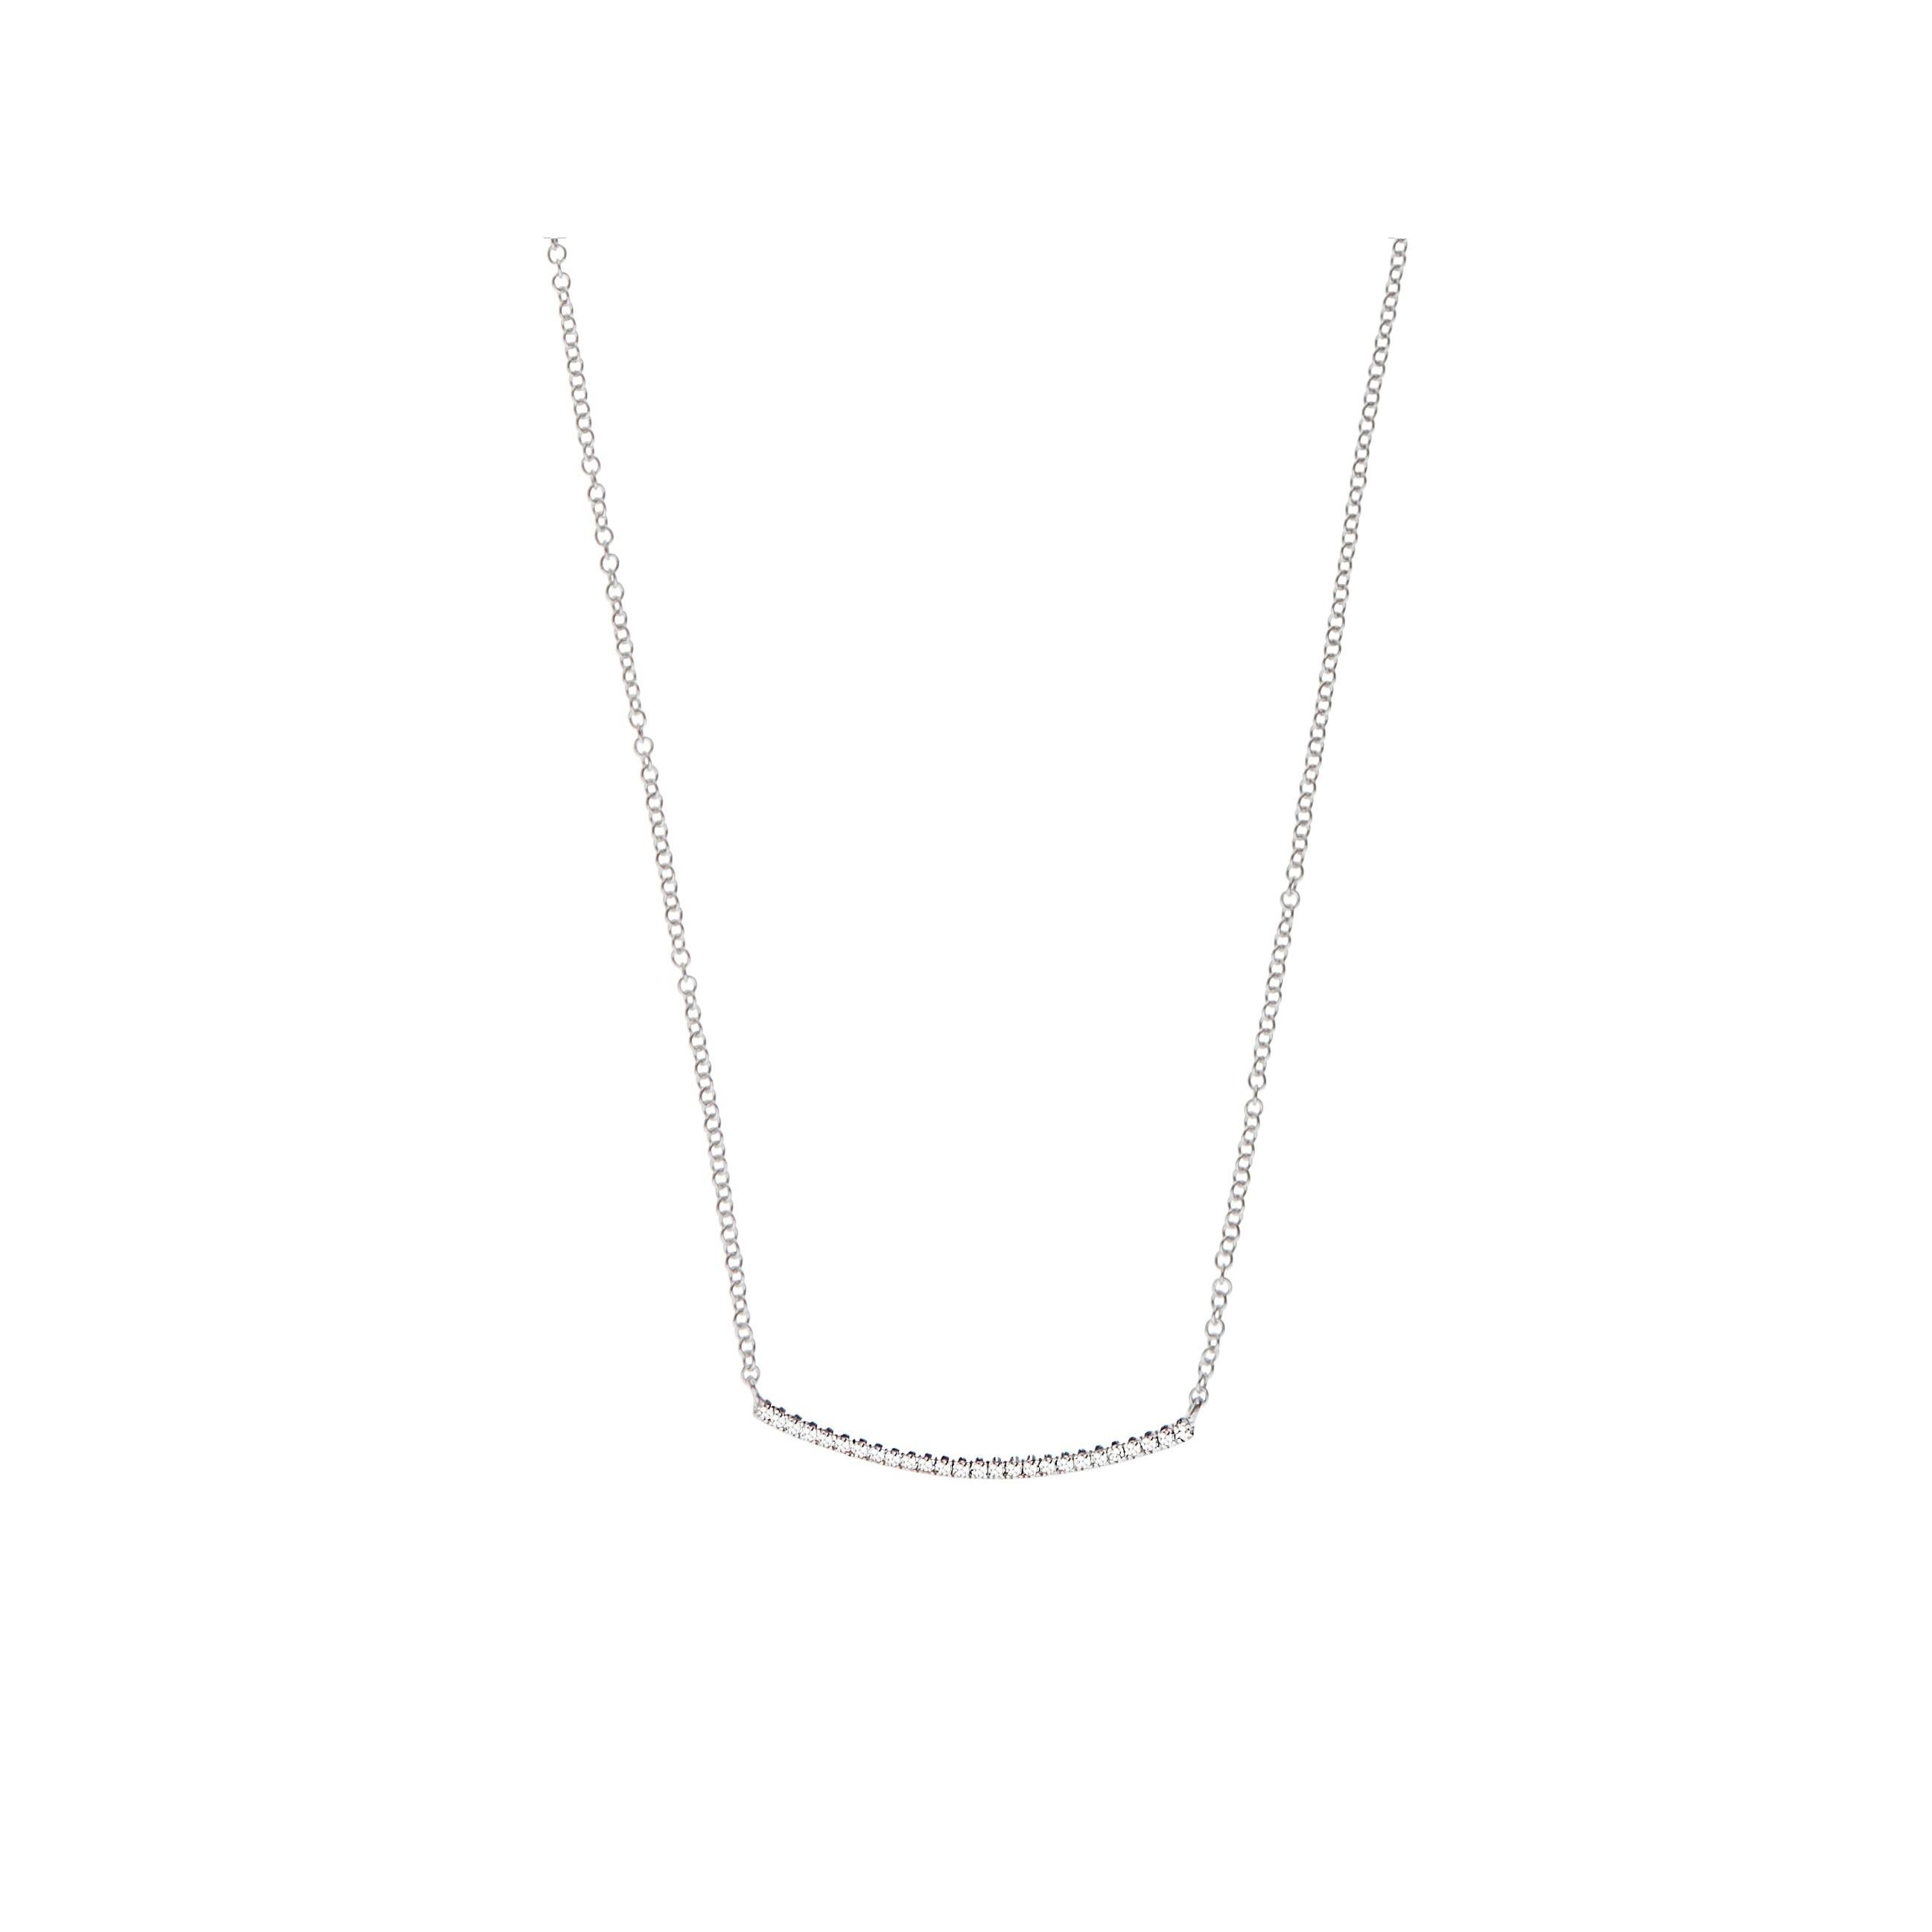 This Round Diamond Bar Chain Pendant is made in 14 karat White Gold, set with natural, colourless diamonds. With a total diamond carat weight (approximate) of 0.07 carat , The Diamonds are H colour, Si clarity. This pendant is 40cm long at its